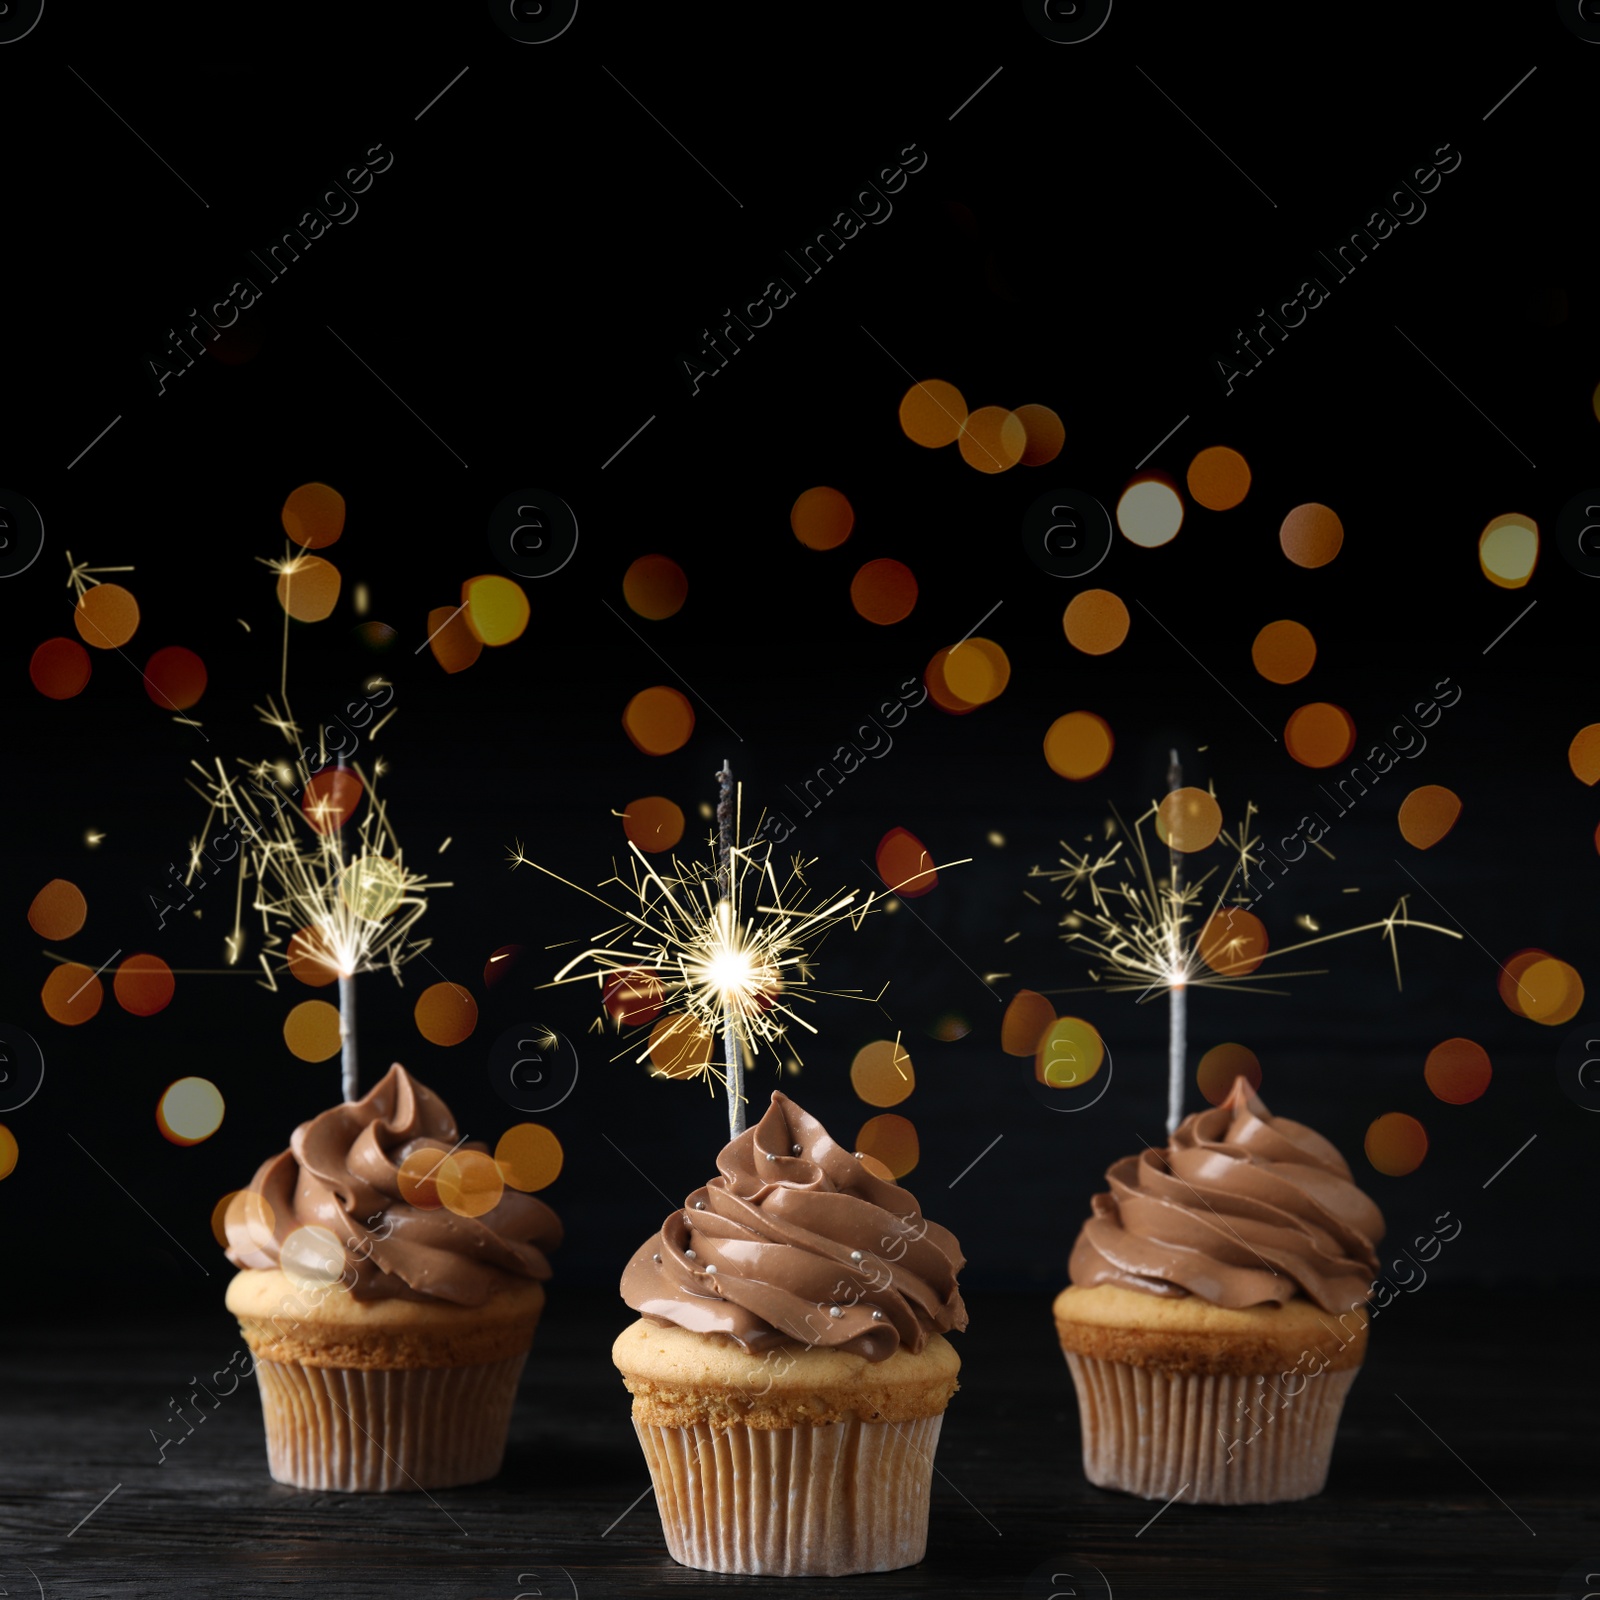 Image of Birthday cupcakes with sparklers on wooden table against dark background